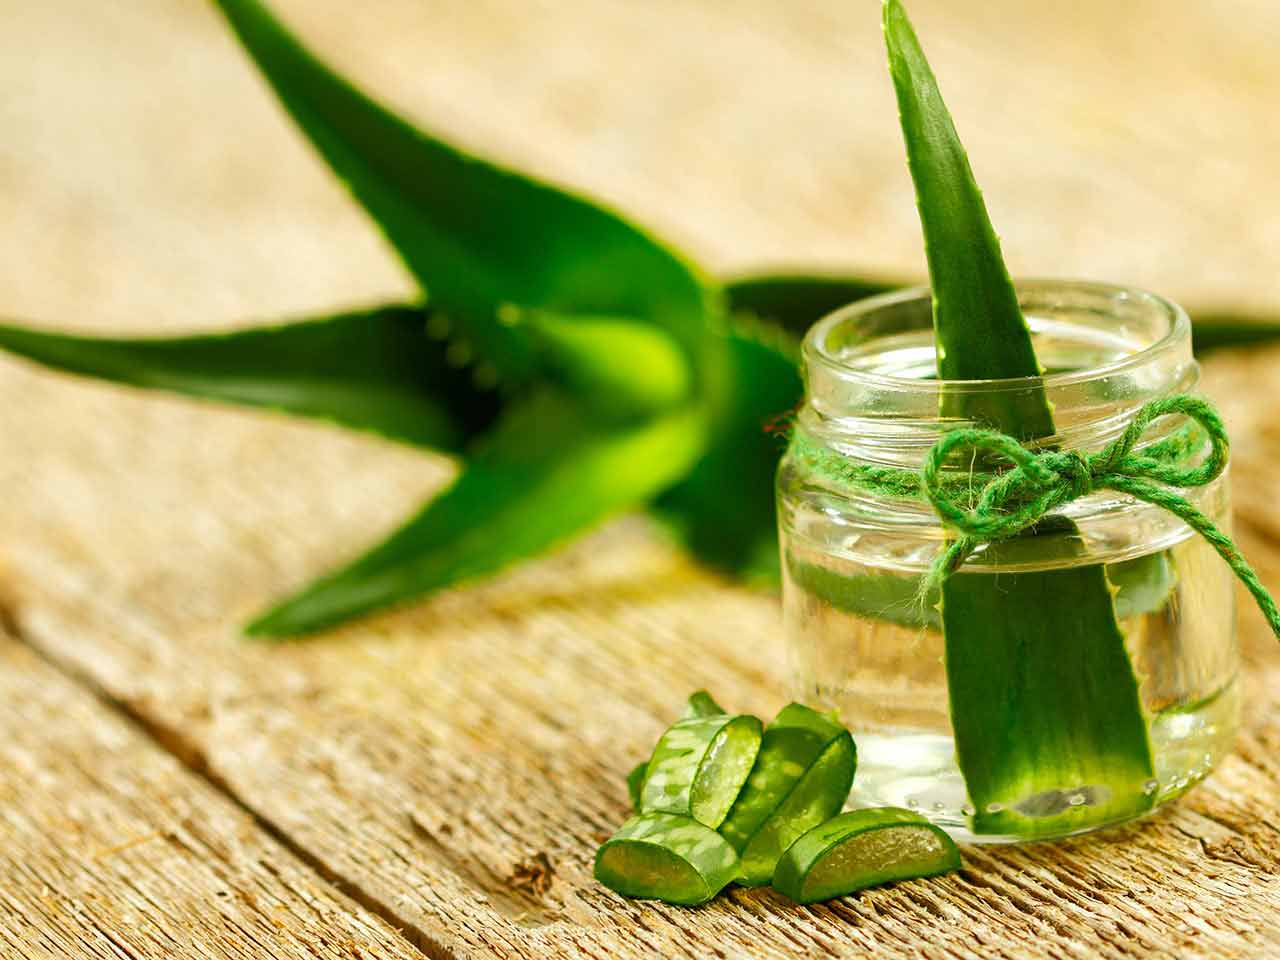 Aloe vera leaves, a common home remedy for wrinkles